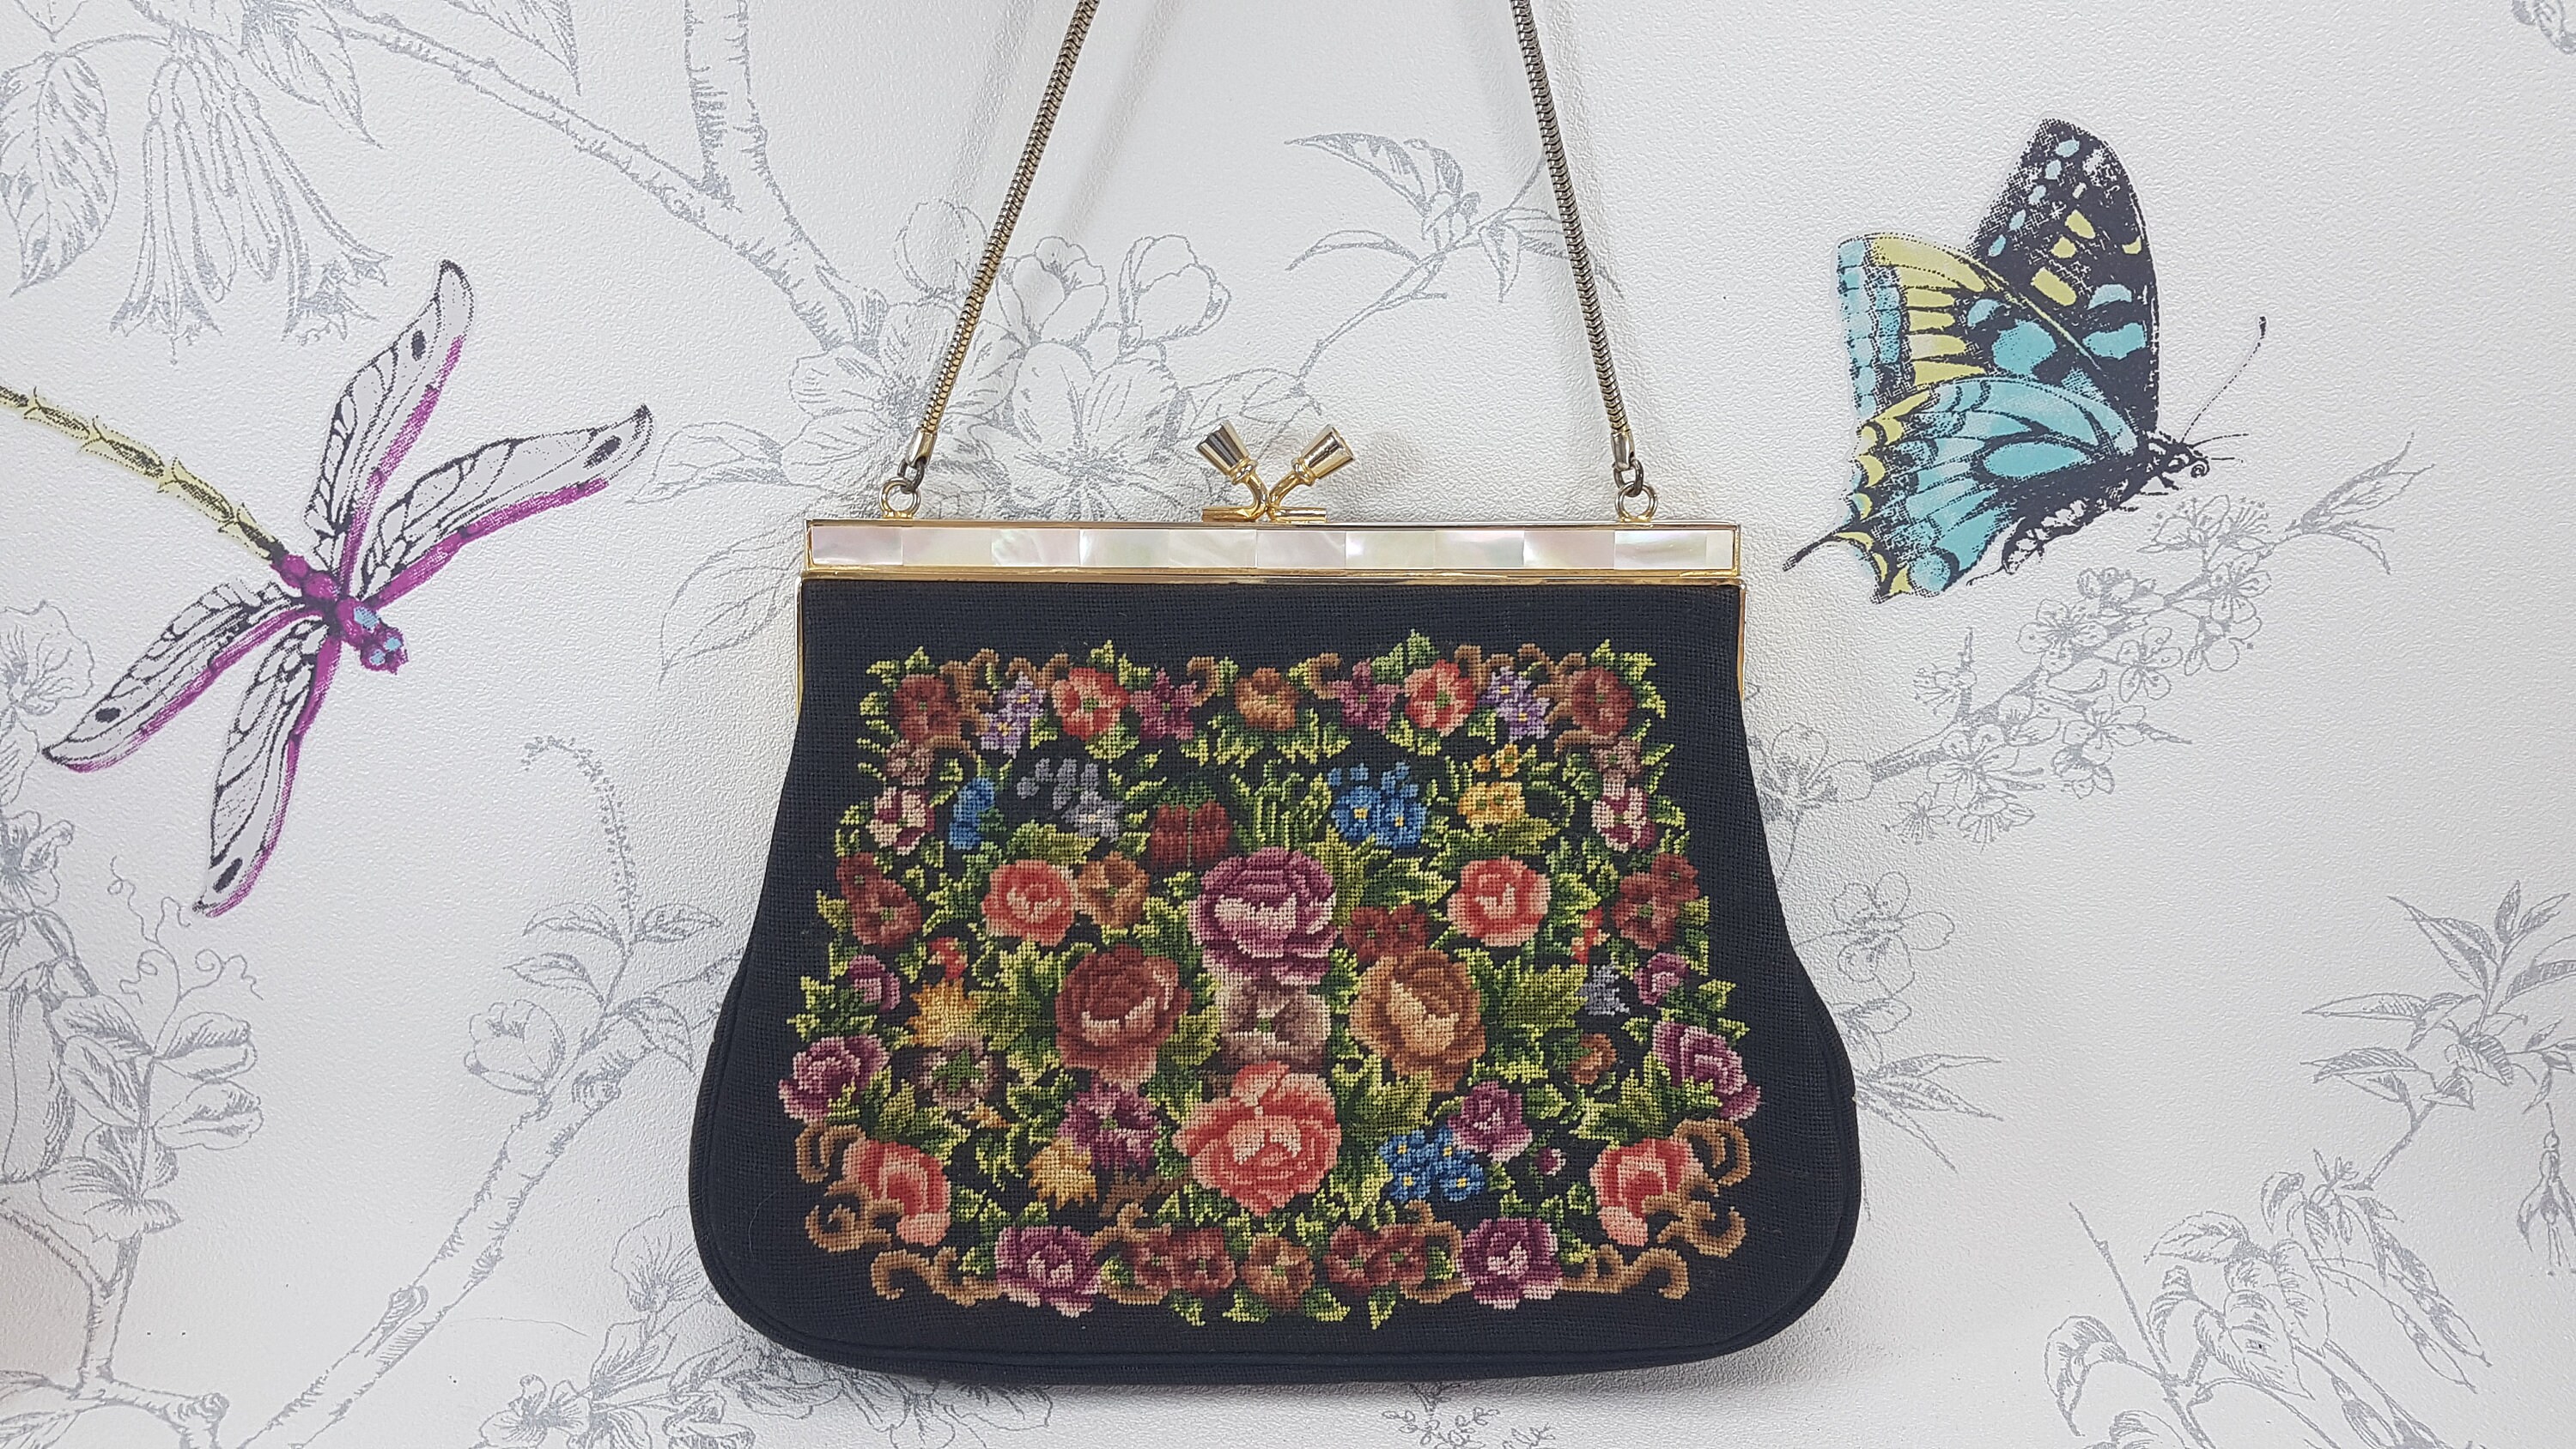 Vintage 1950's Tapestry Floral Evening Bag from West Germany